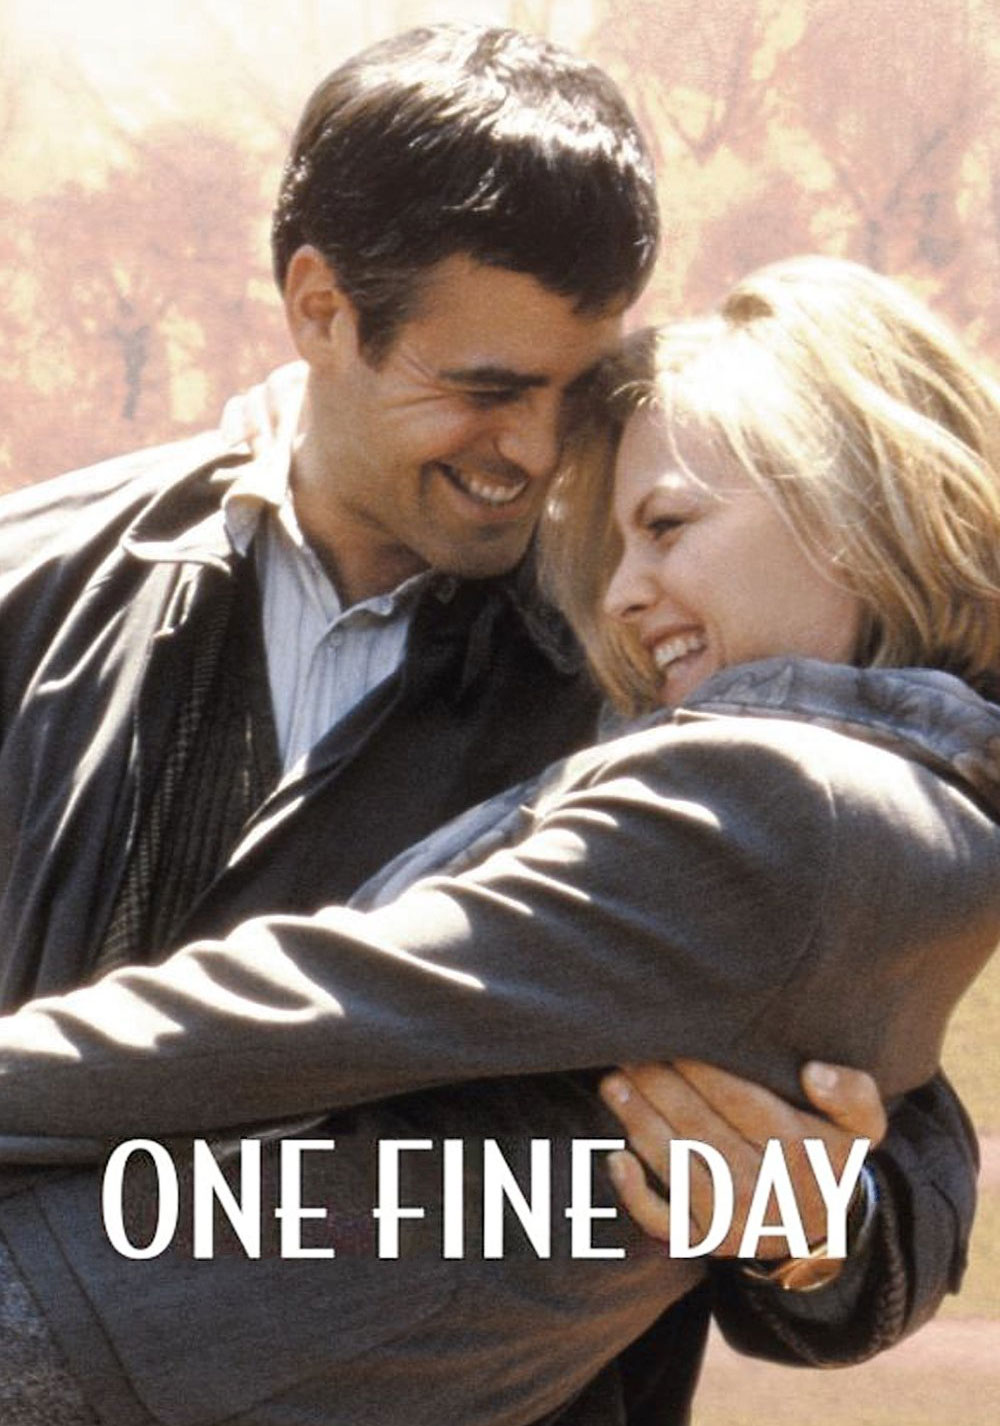 One Fine Day Meaning